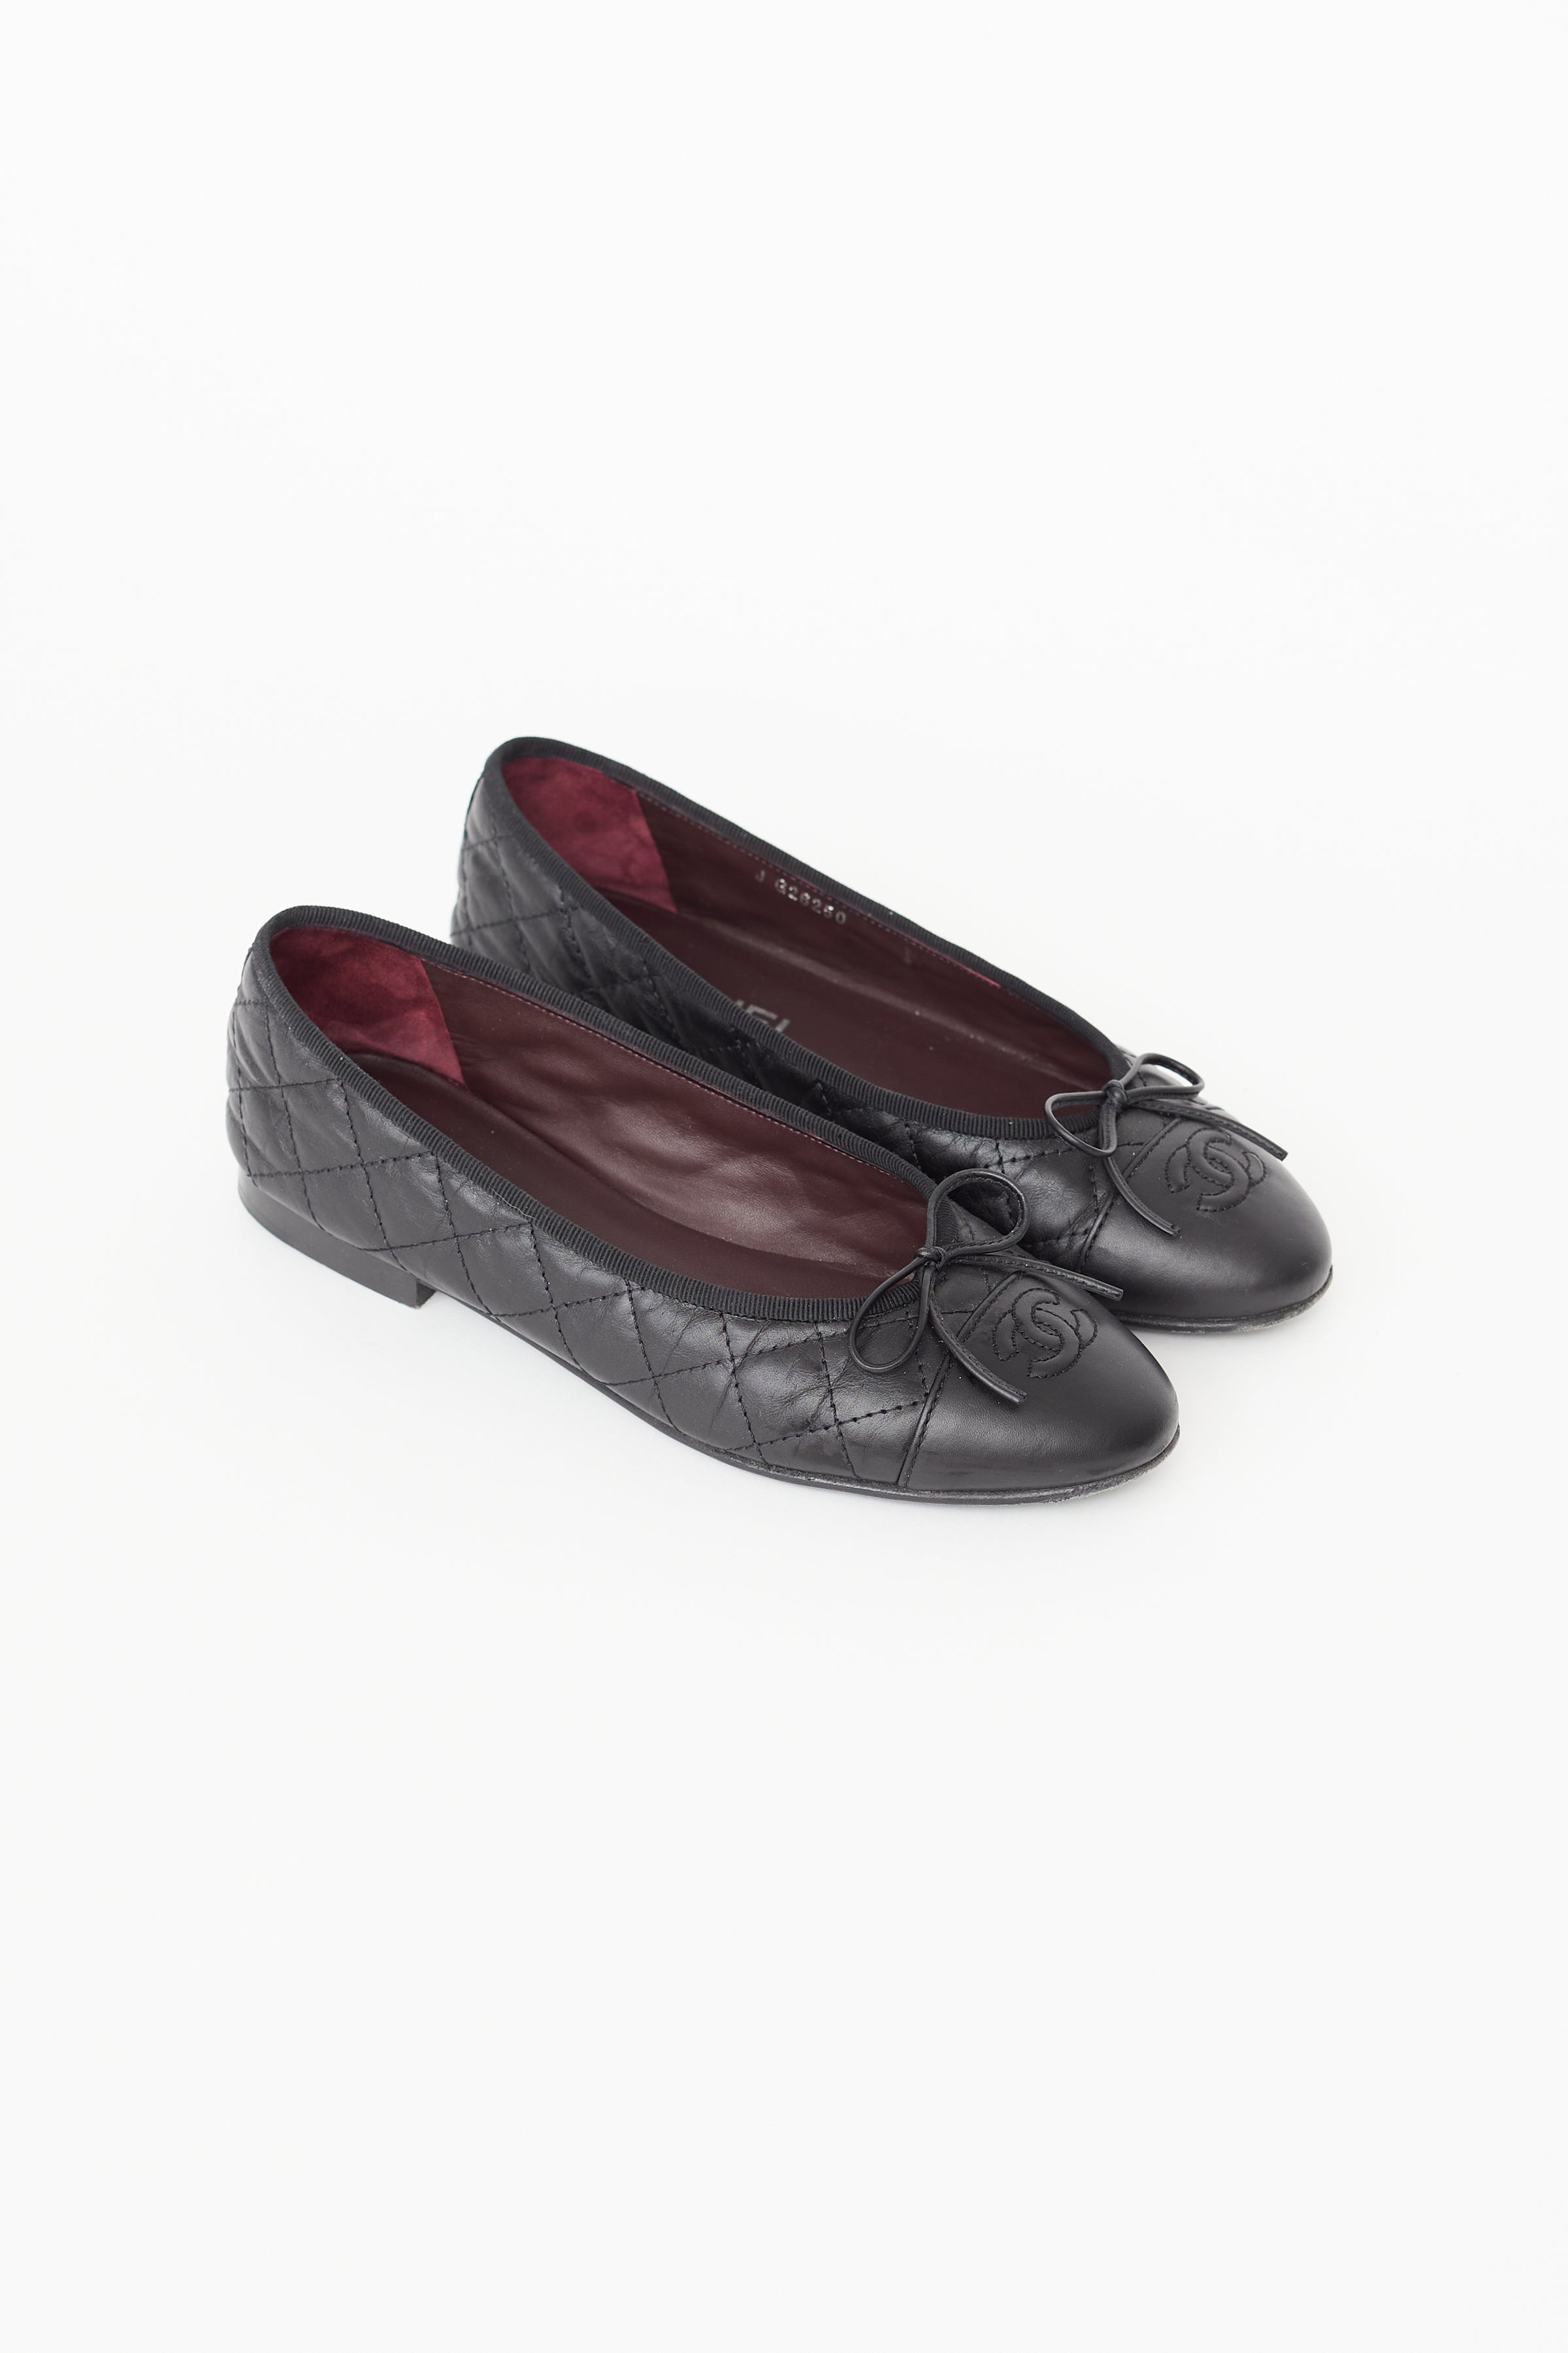 Vintage 90s/00s Black Leather Quilted Ballet Flats By Chanel